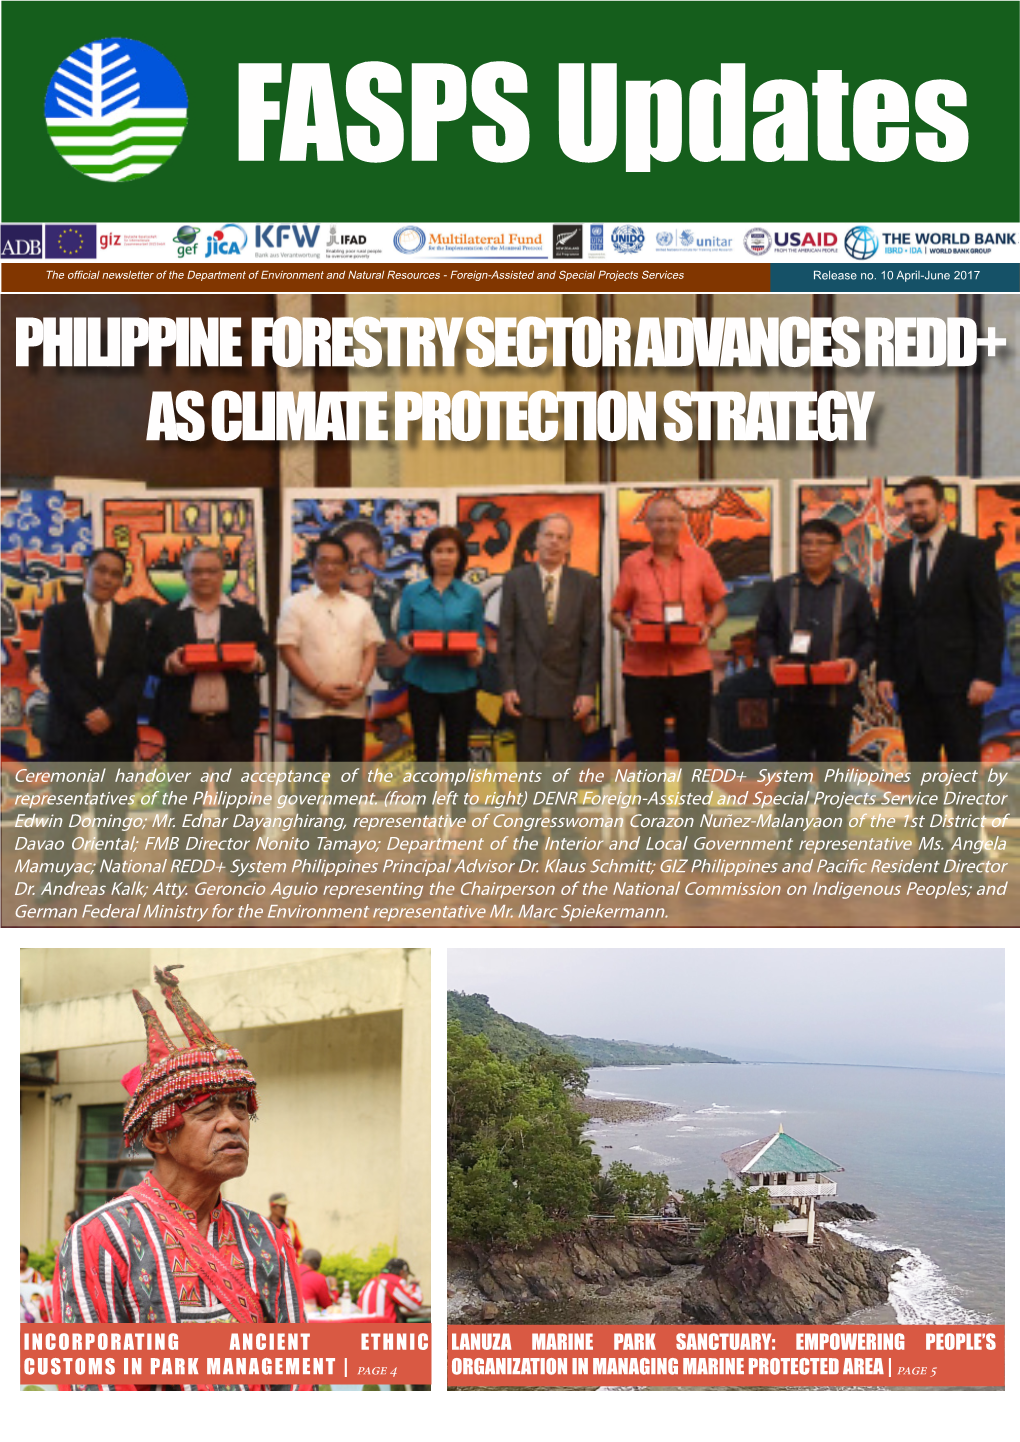 Philippine Forestry Sector Advances Redd+ As Climate Protection Strategy